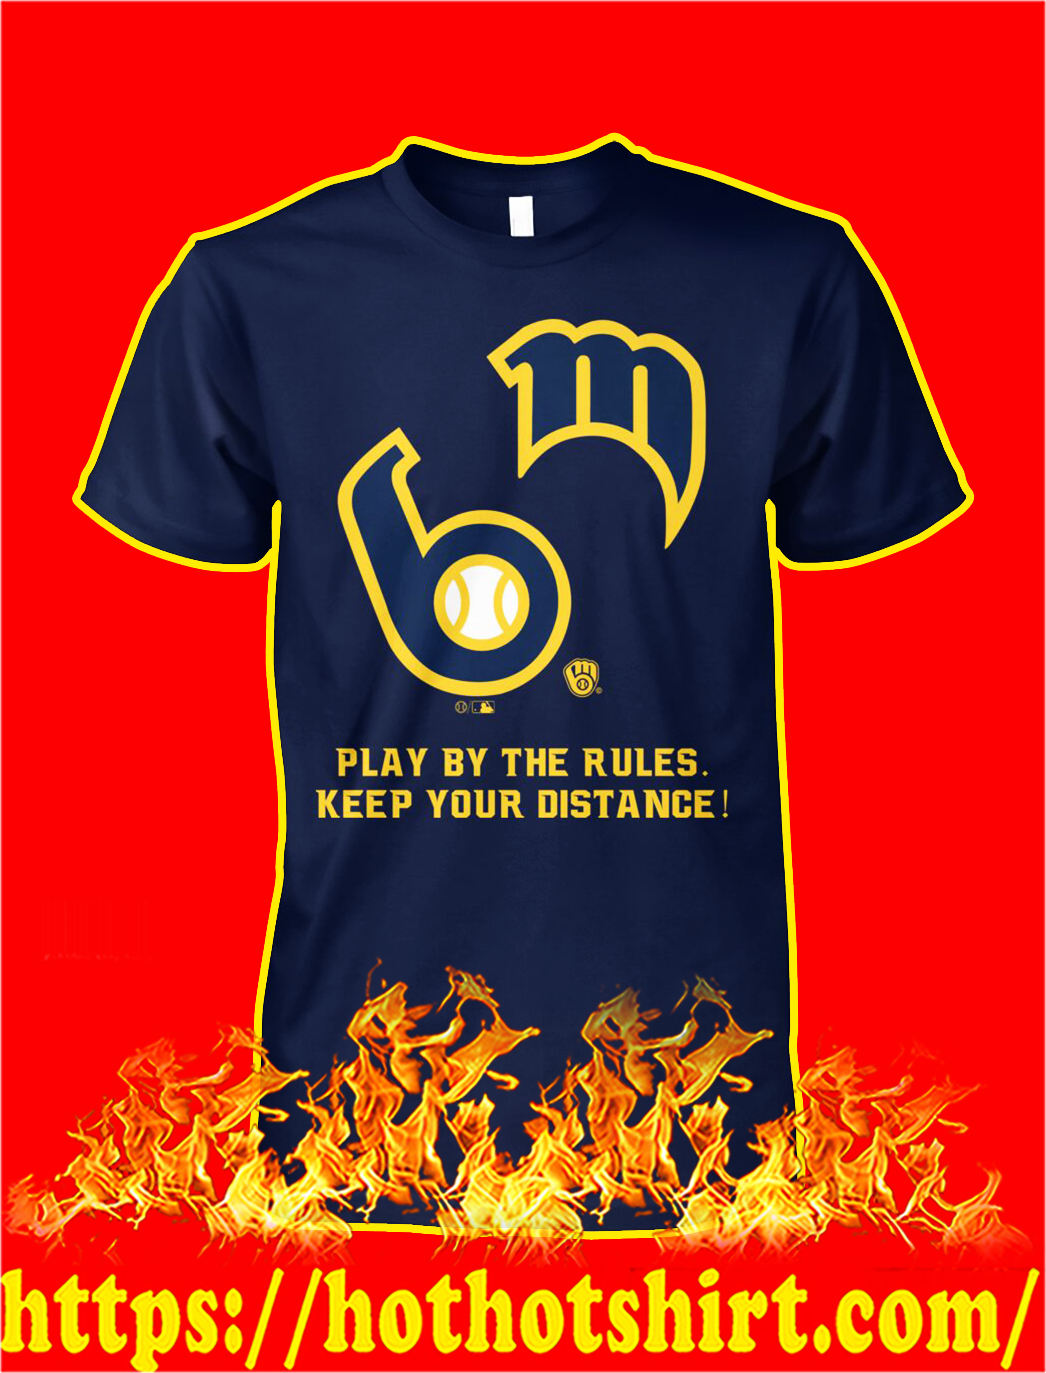 MLB play by the rules keep your distance shirt and tank top